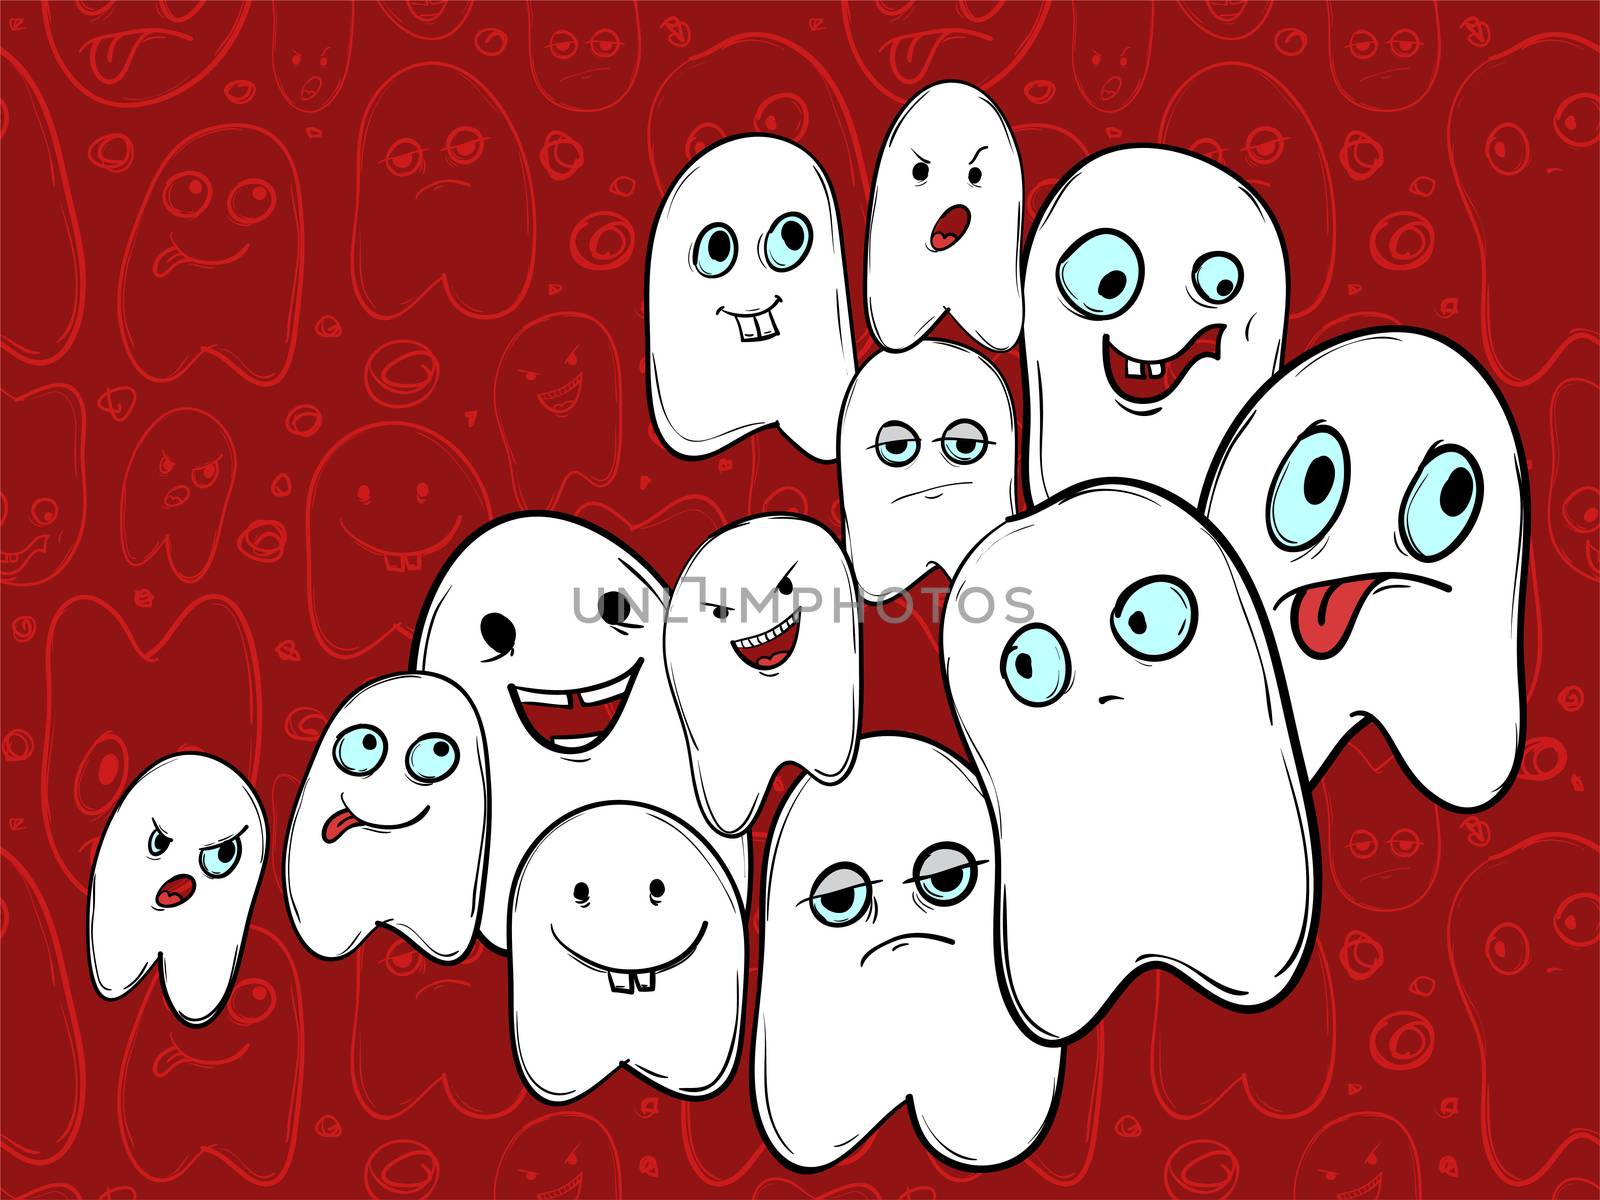 Company amusing ghosts with different emotions. Halloween. illustration